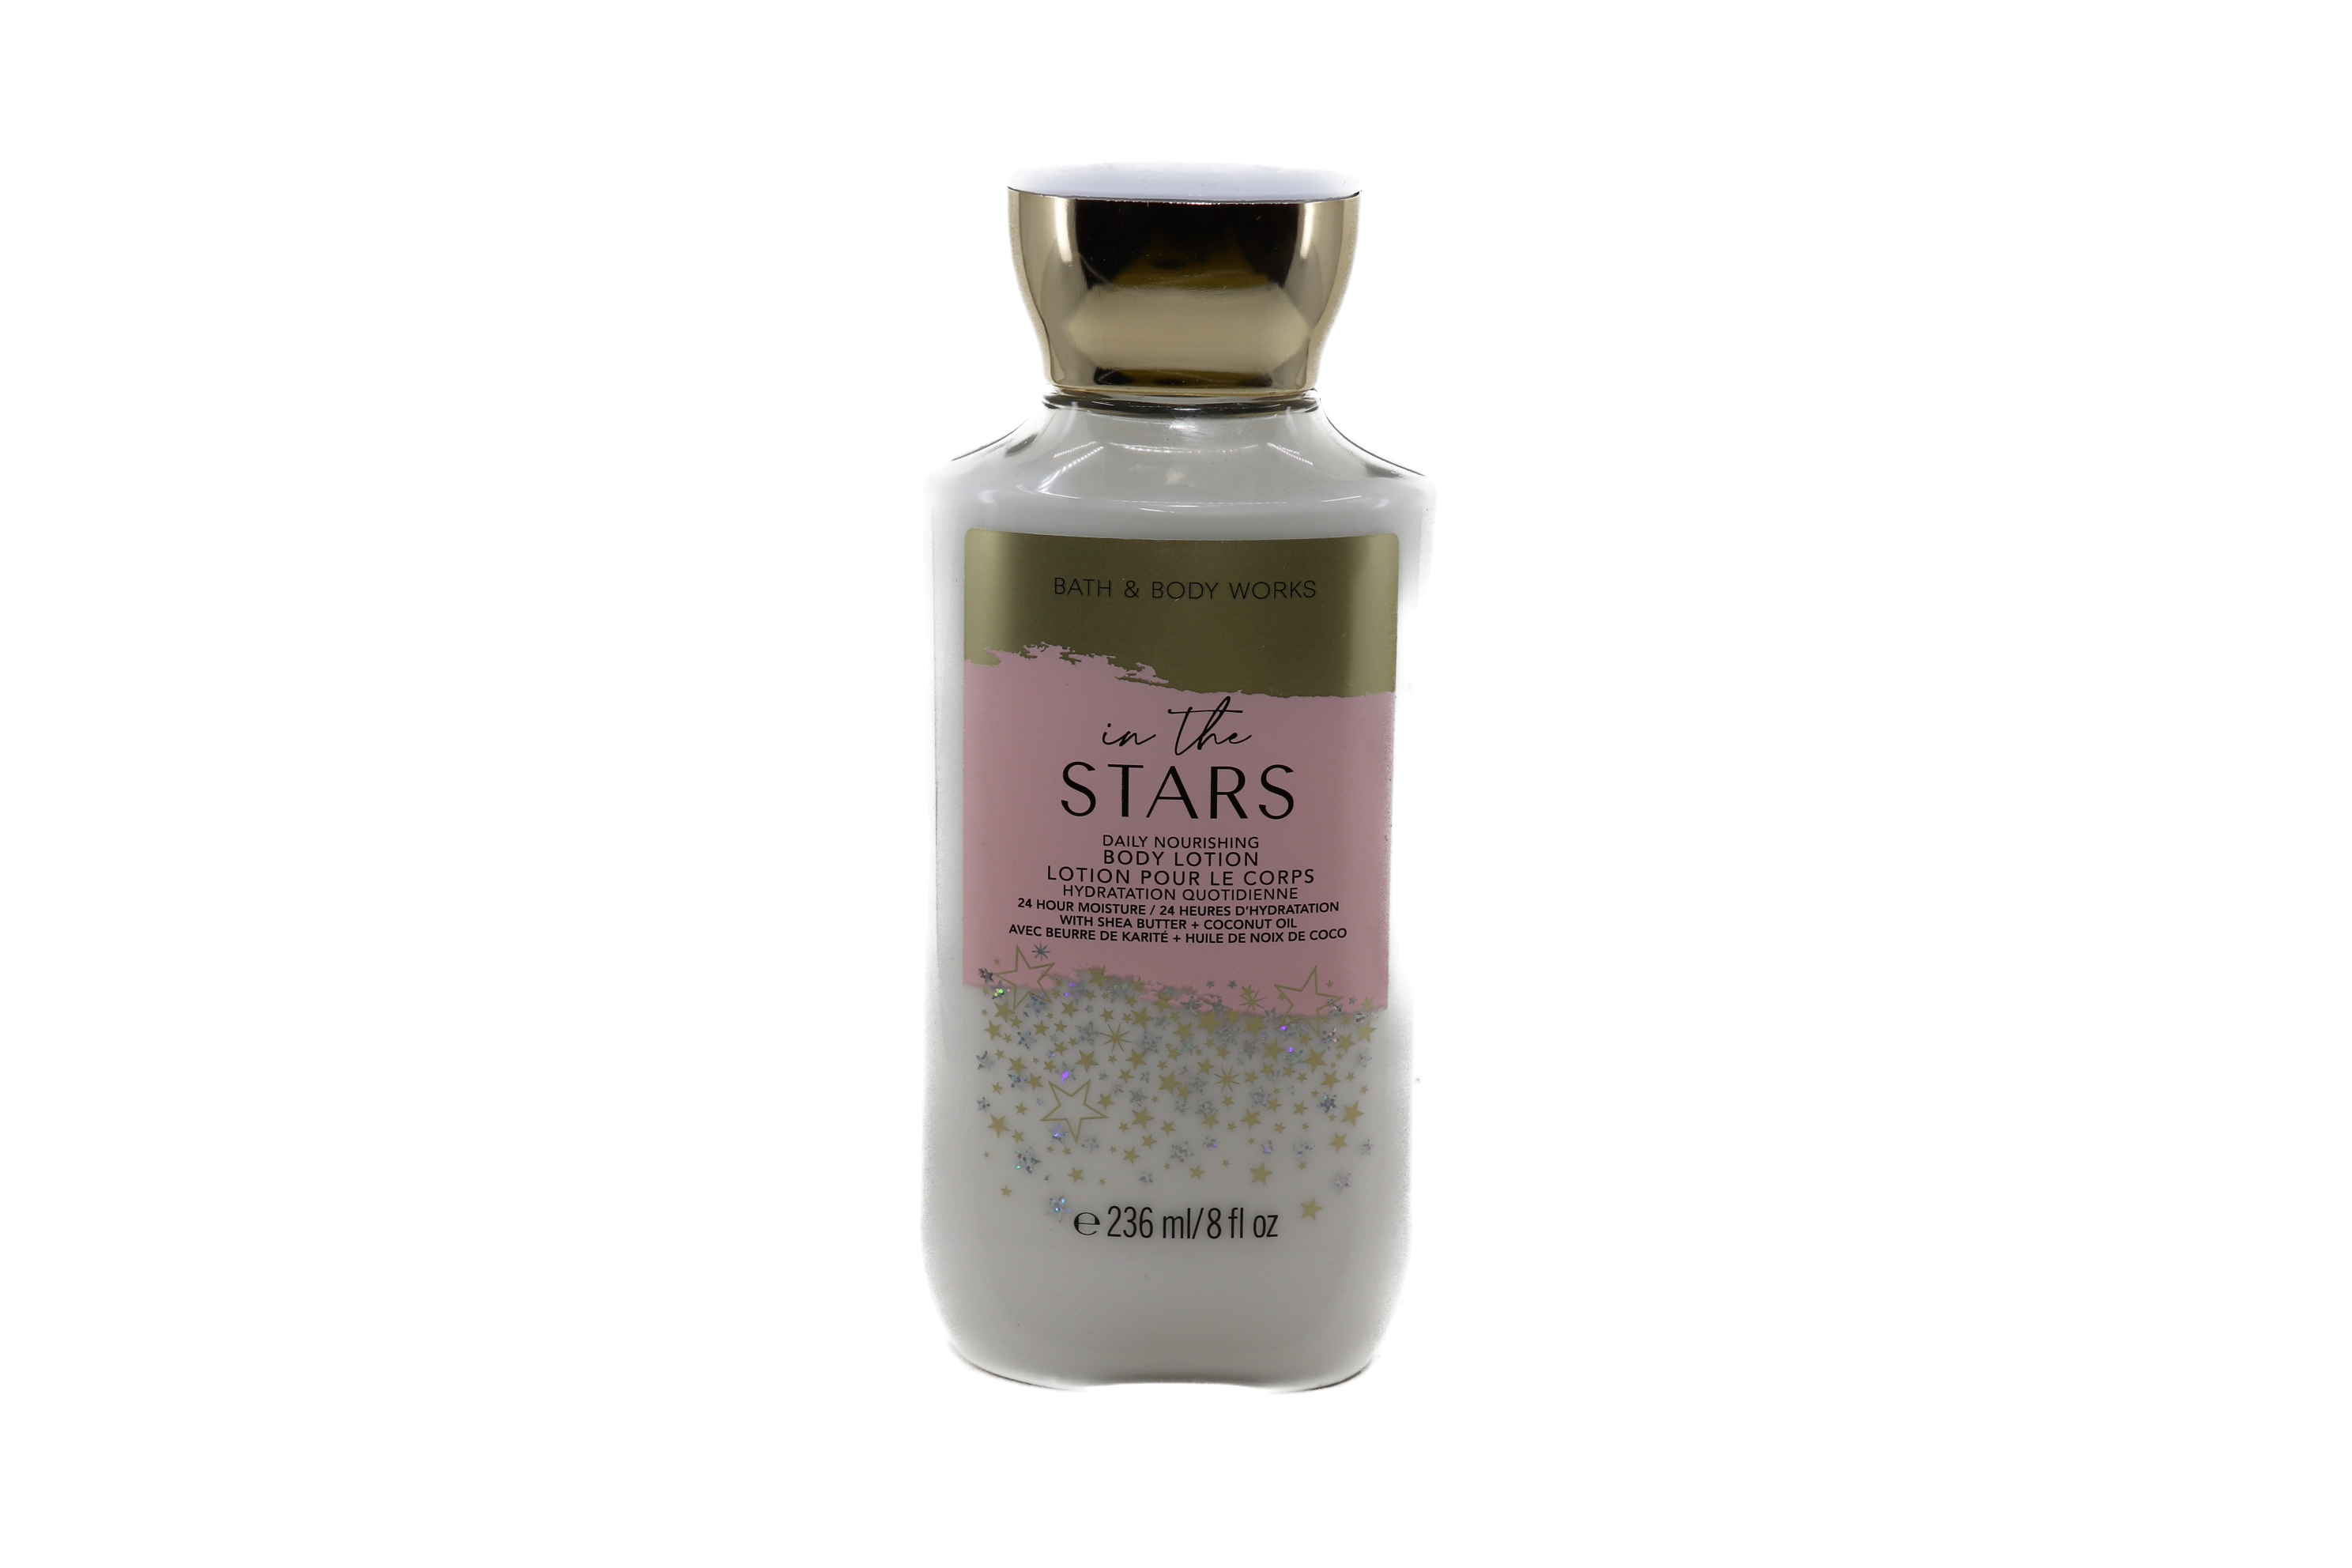 Bath & Body Works In The Stars Body Lotion